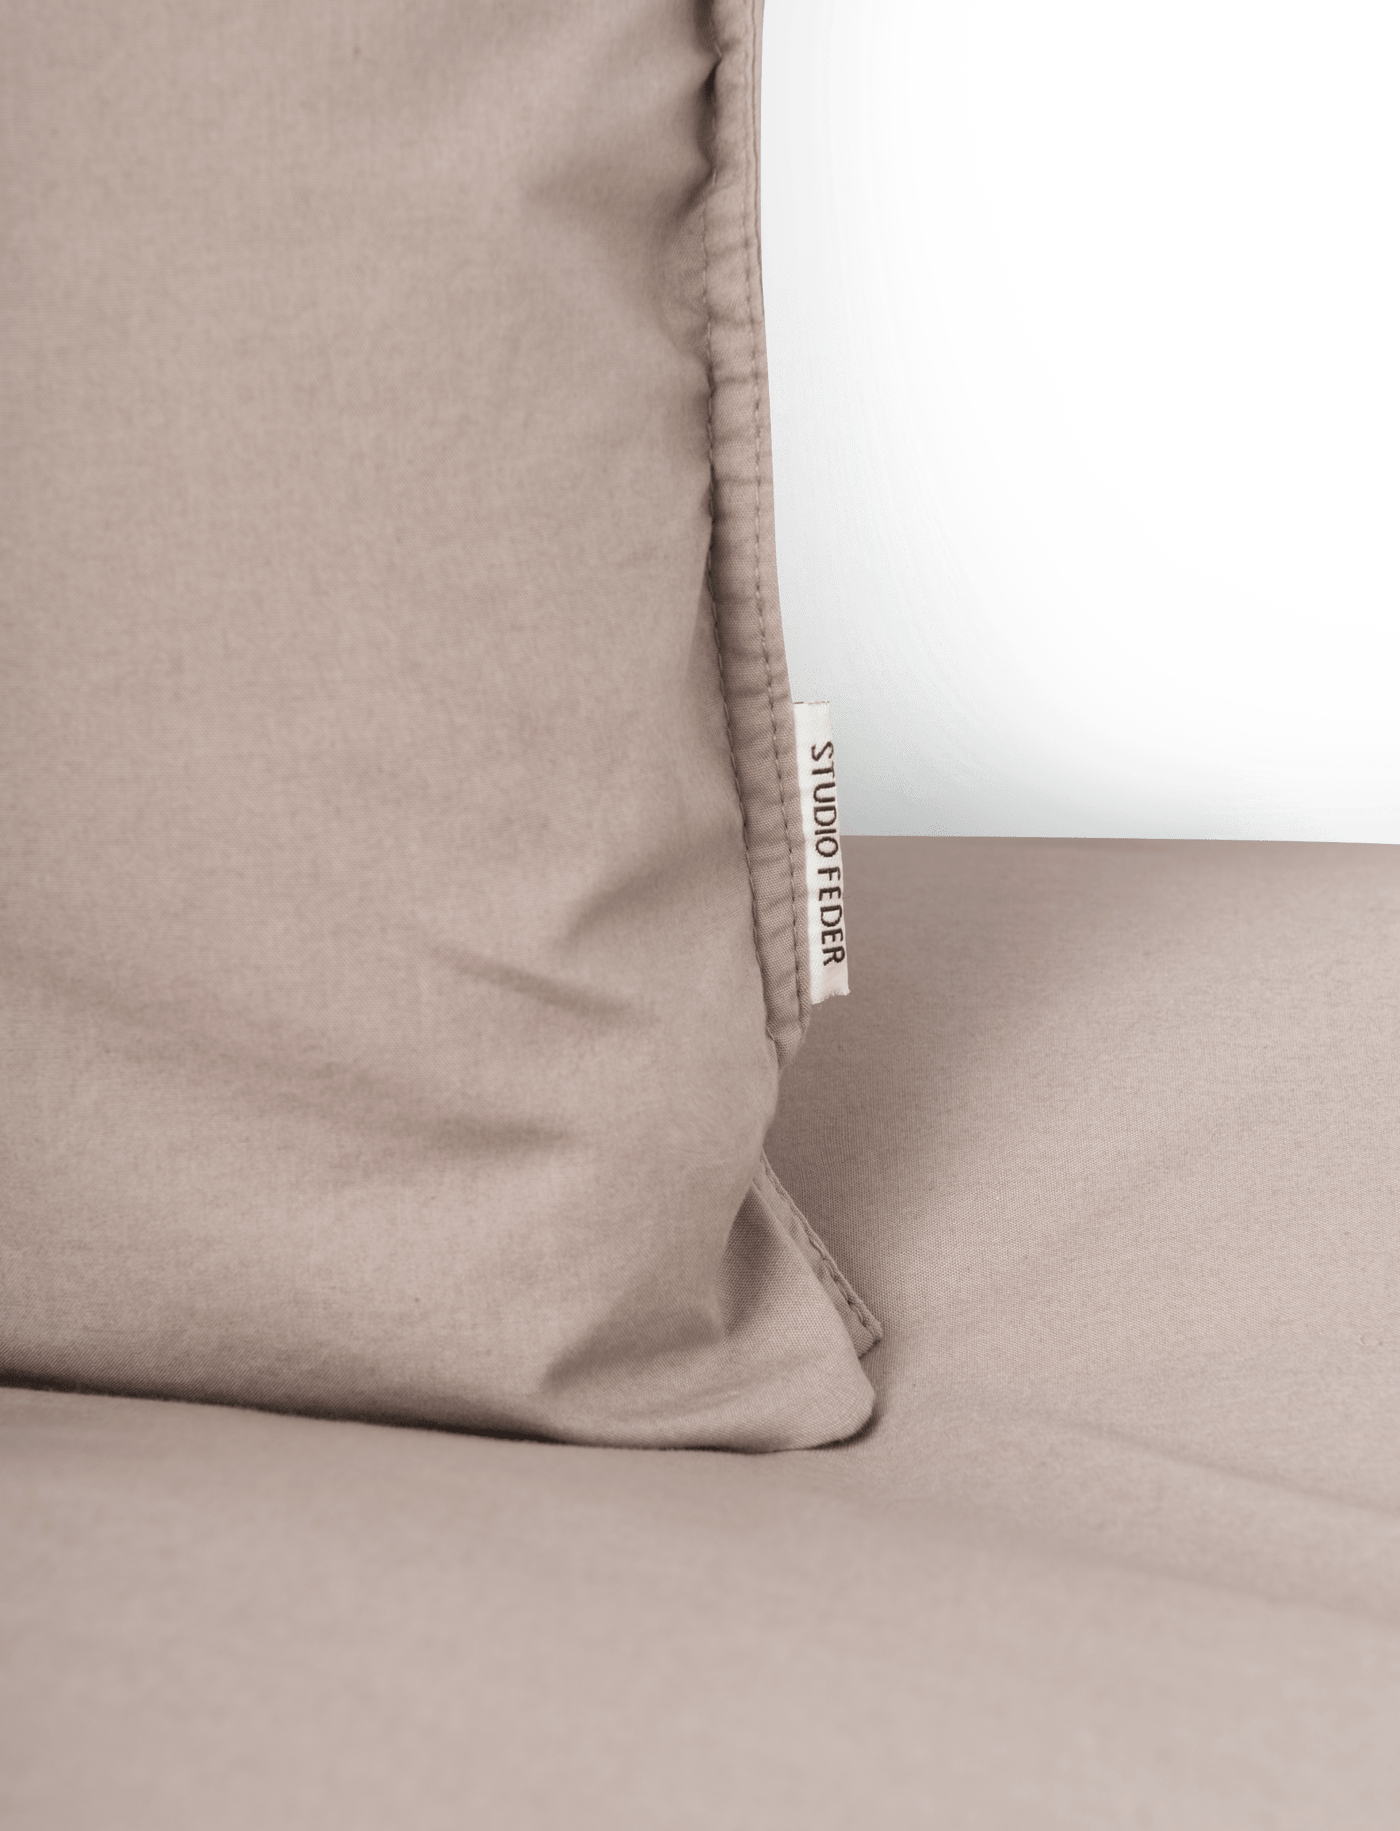 Adult Bedding Xl - Taupe